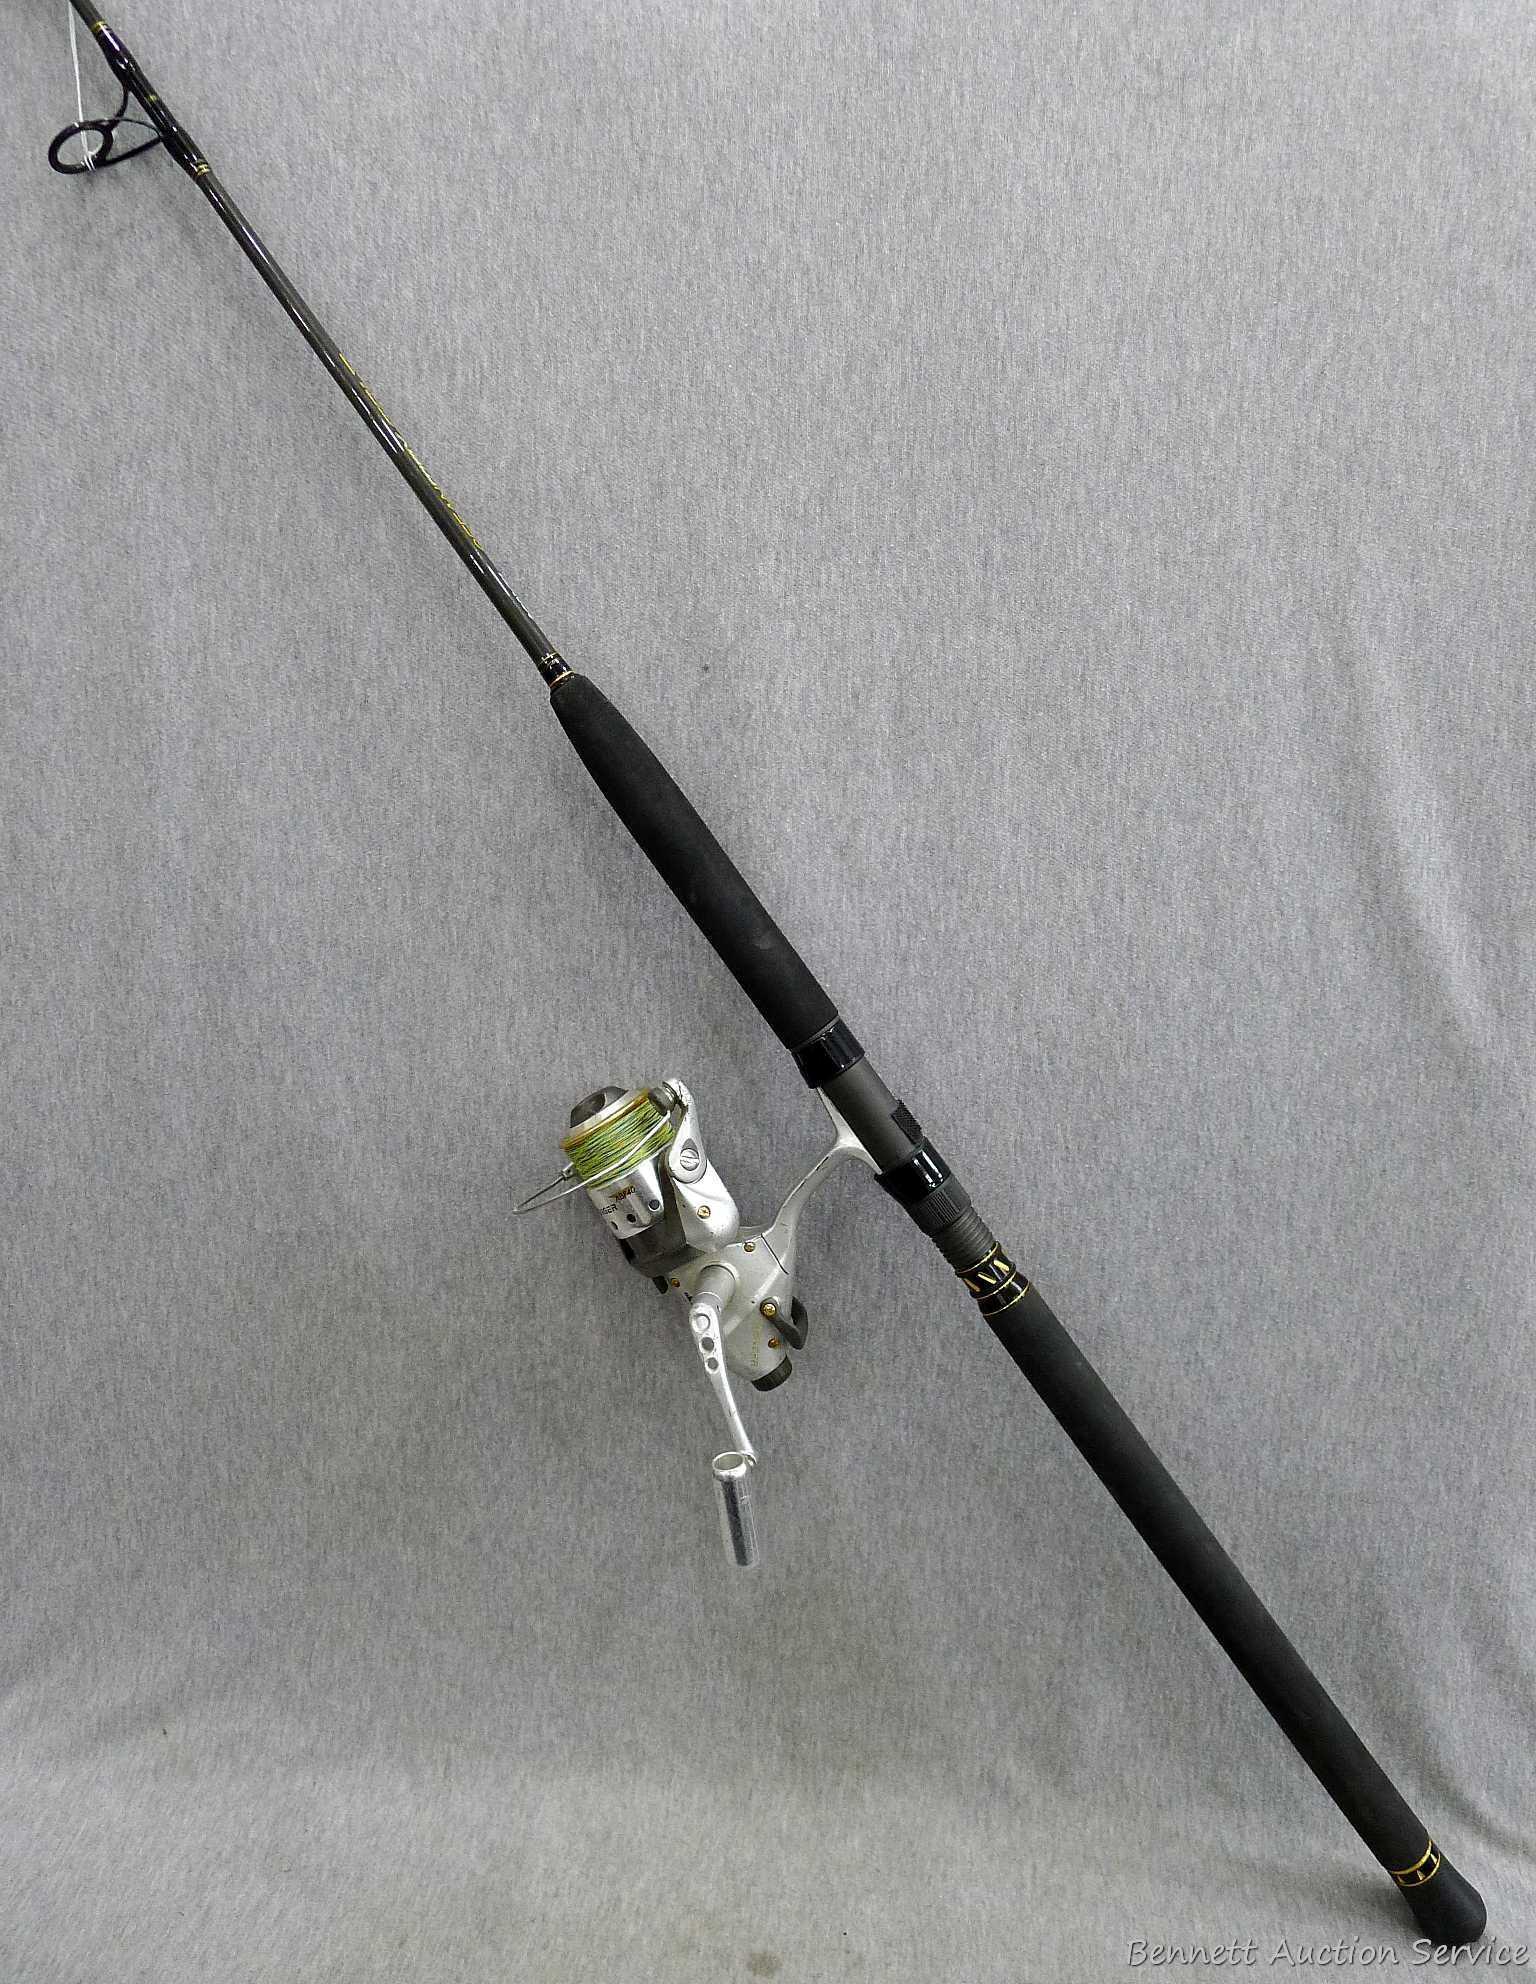 Maxel 6-1/2' OceanMax Gold fishing rod with an